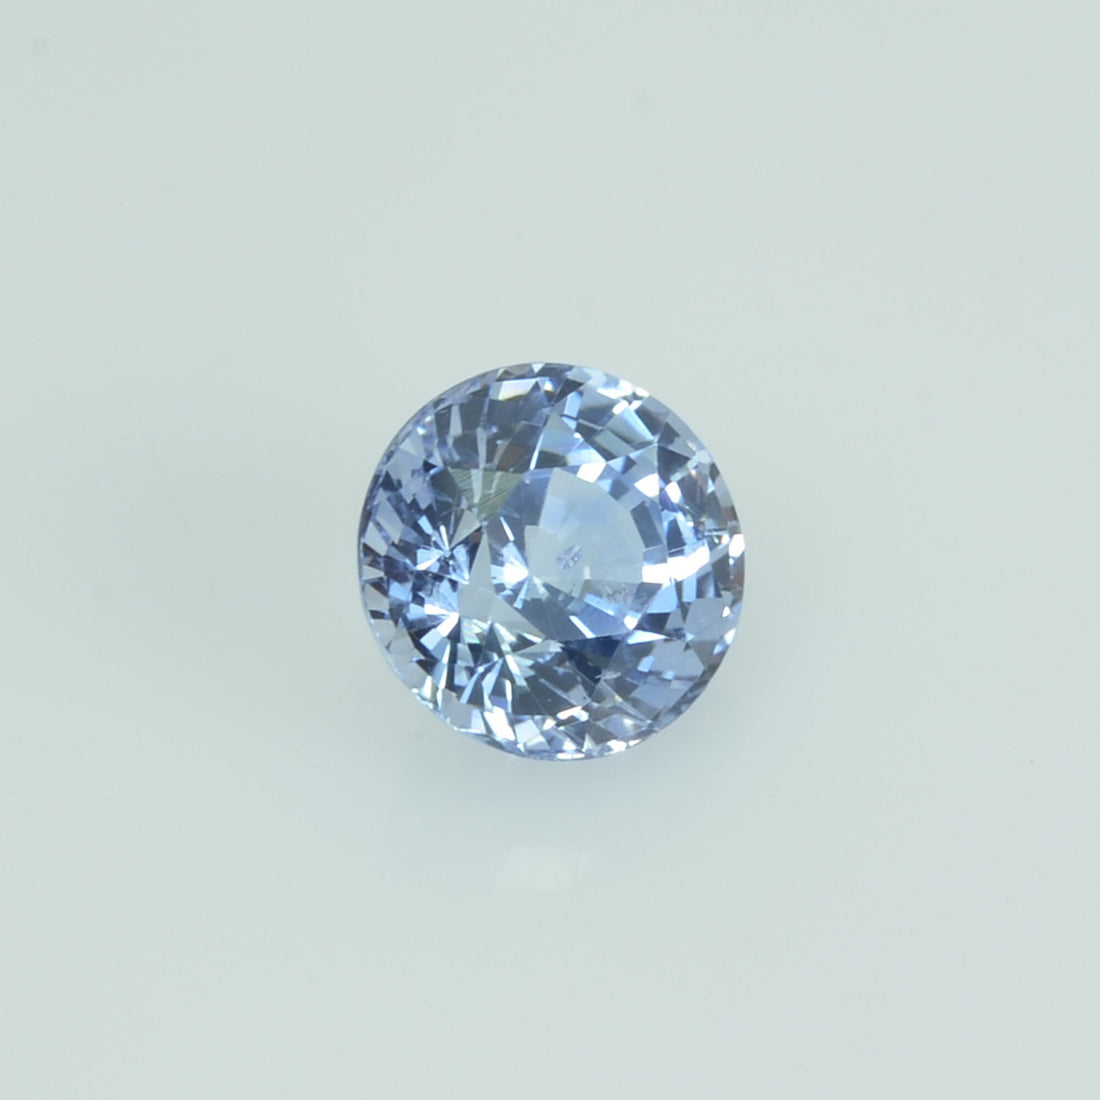 0.82 Cts Natural Blue Sapphire Loose Gemstone Round Cut